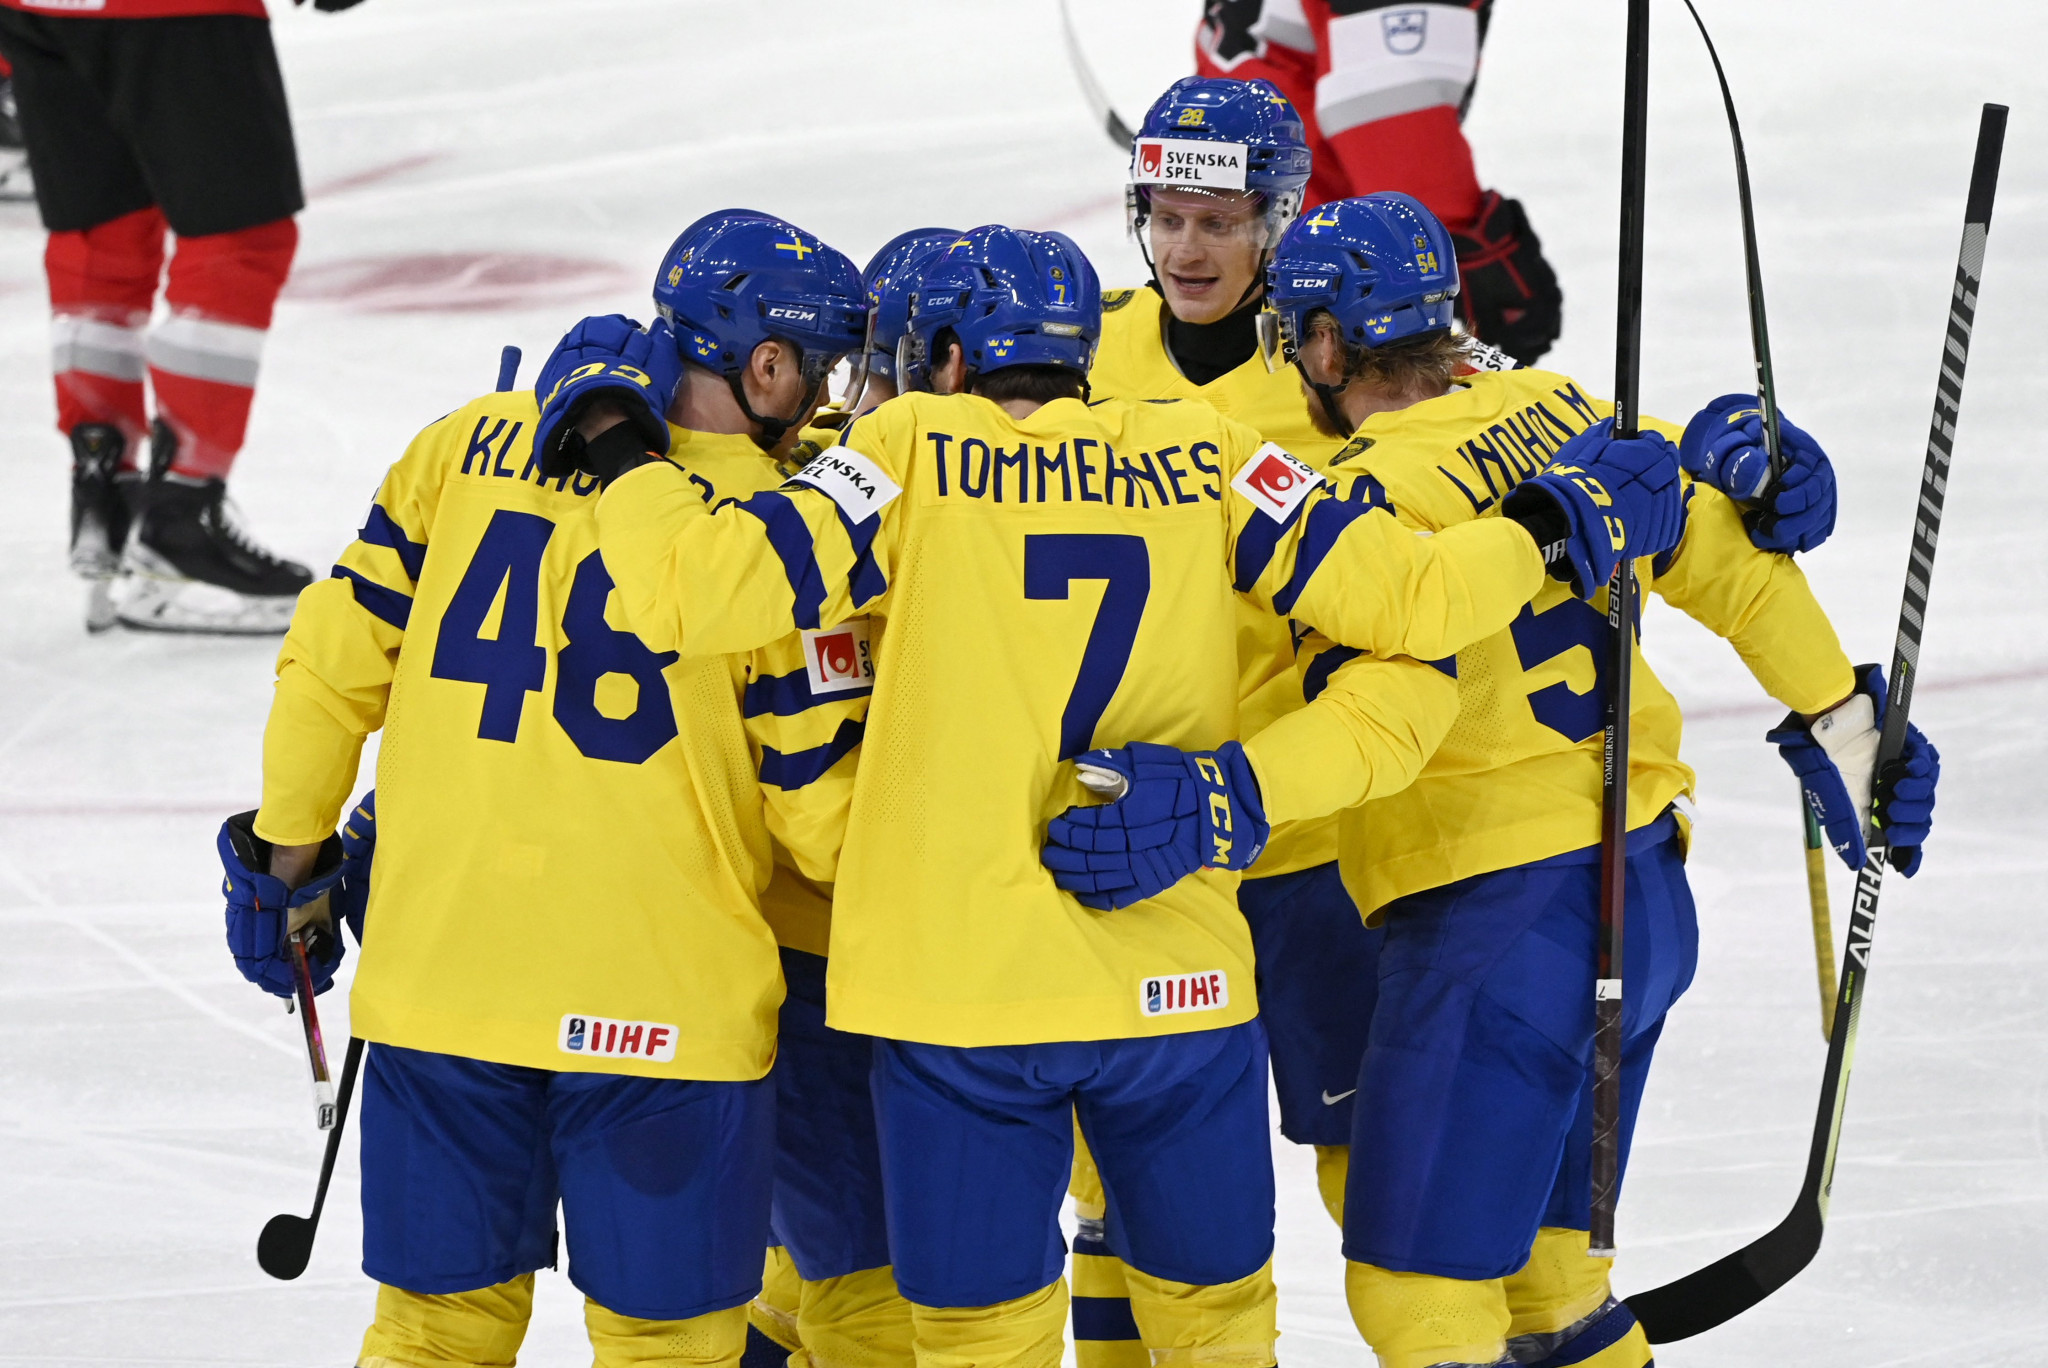 Sweden defeated Finland 3-2 at the IIHF World Championship ©Getty Images